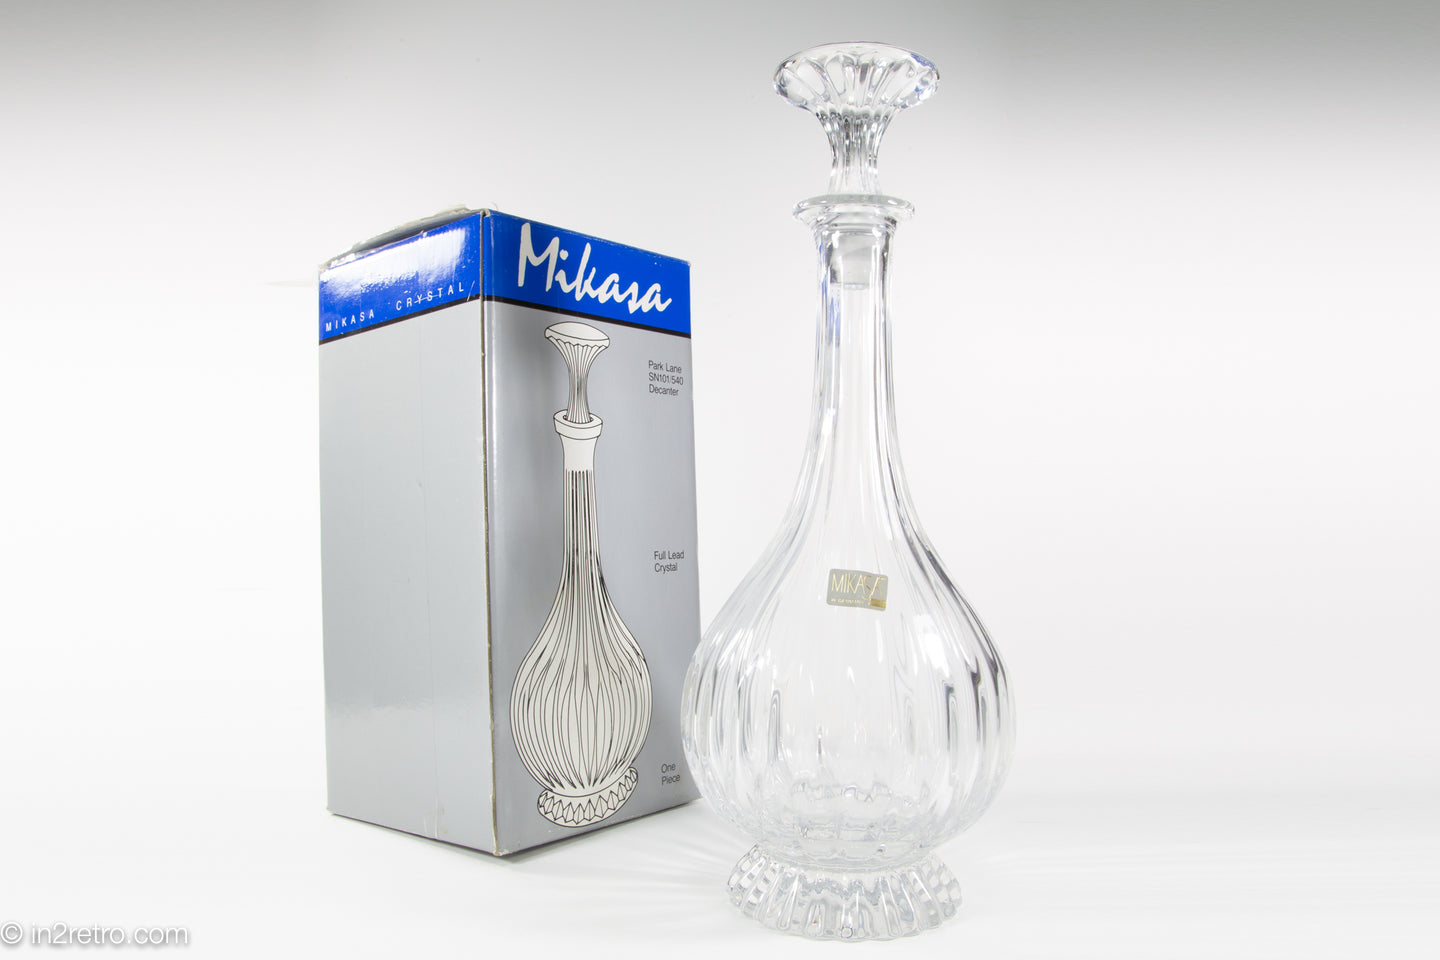 VINTAGE MIKASA WEST GERMANY PARK LANE DECANTER WITH STOPPER FULL LEAD CRYSTAL | ORIGINAL BOX WITH FORTUNOFF PRICE TAG